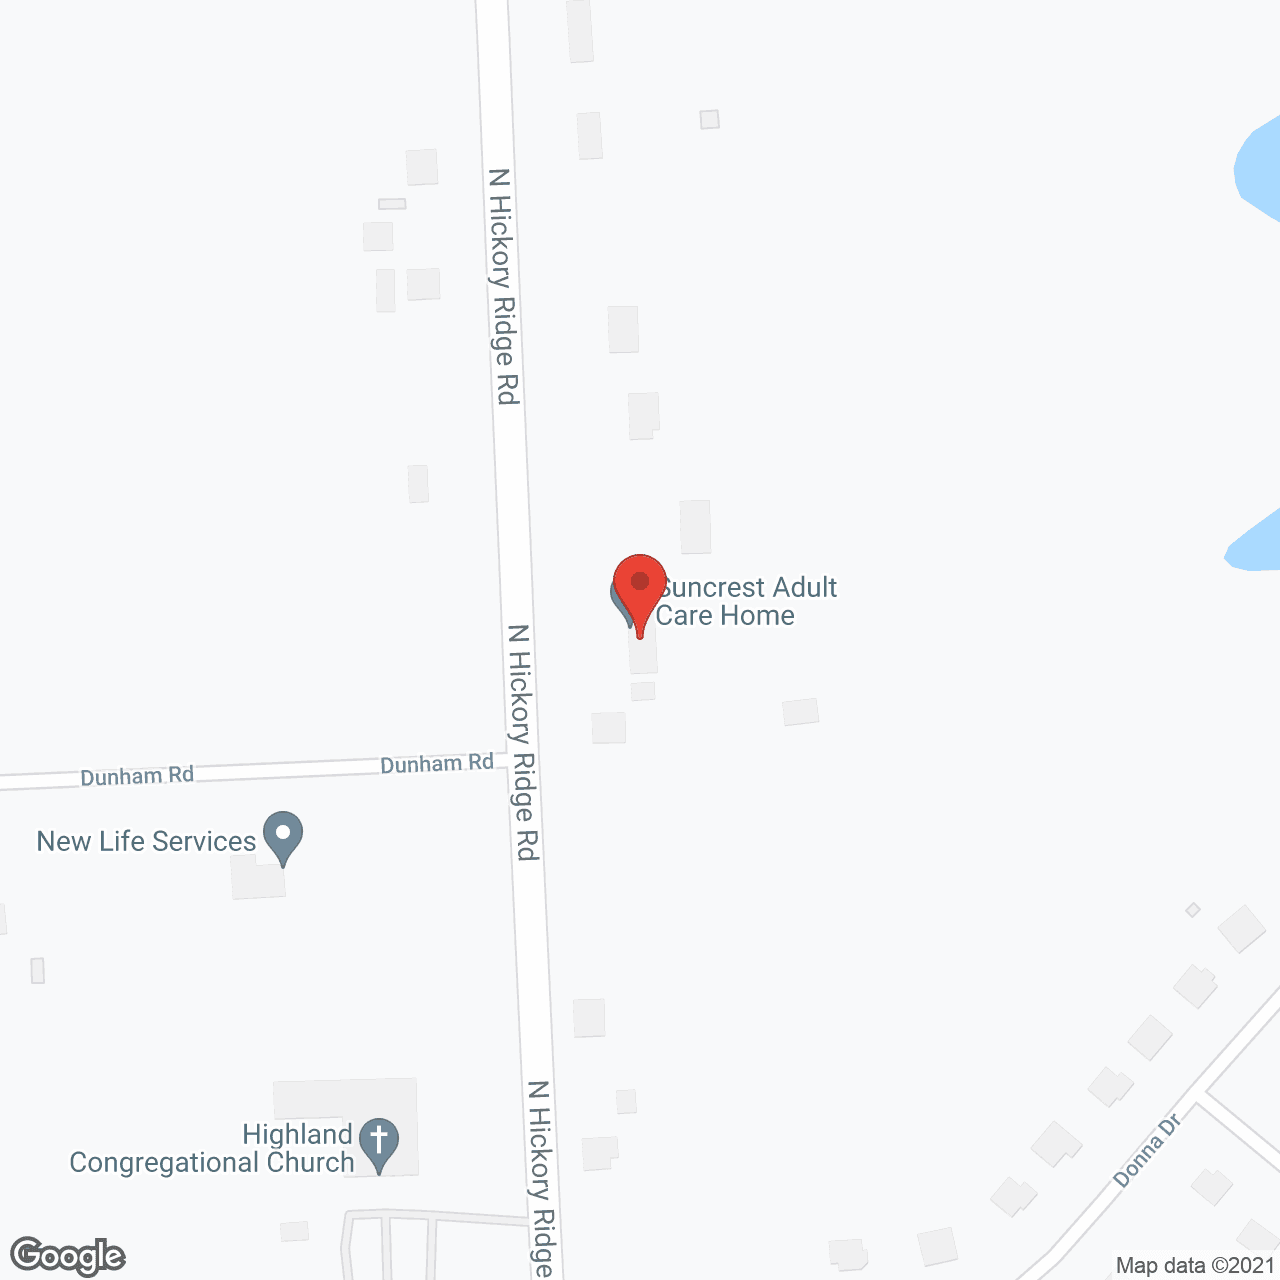 Suncrest Adult Care Home in google map